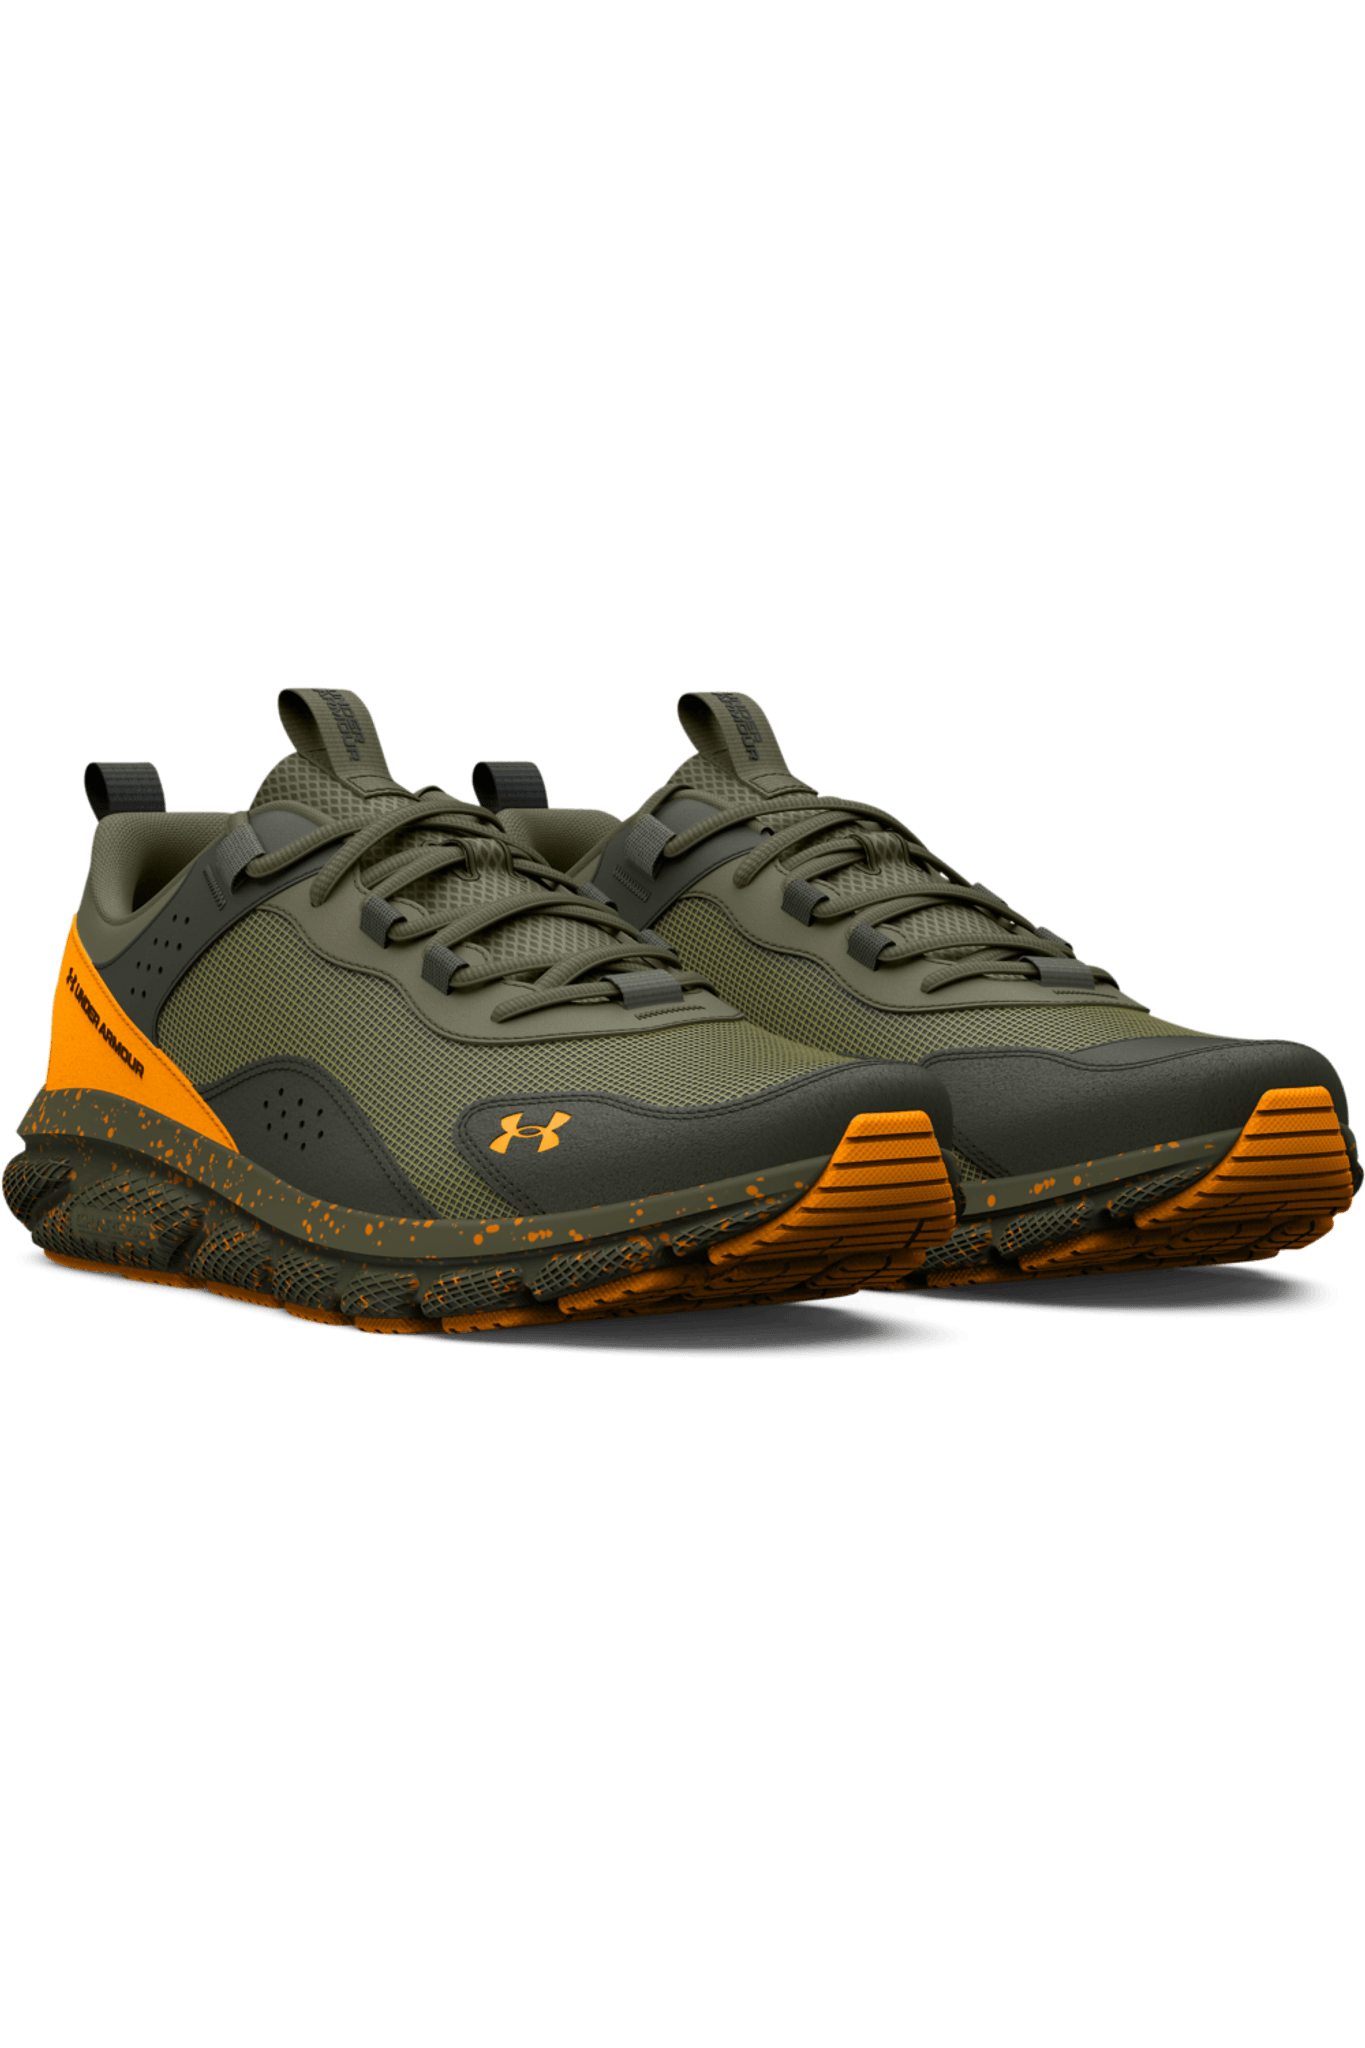 Under Armour Charged Verssert Speckle. Hombre